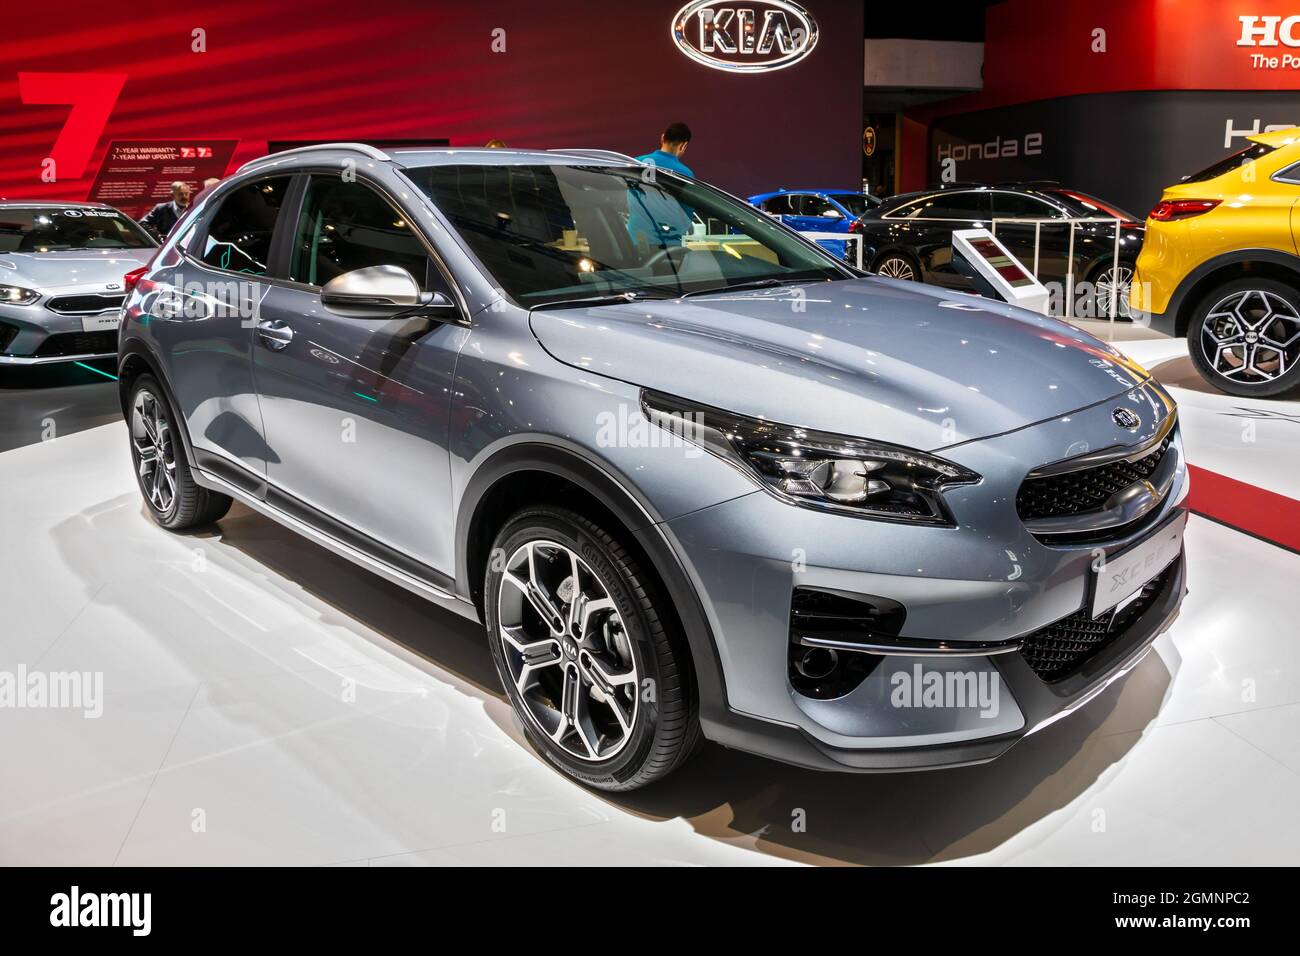 Kia Xceed new car model shown at the Autosalon 2020 Motor Show. Brussels,  Belgium - January 9, 2020 Stock Photo - Alamy